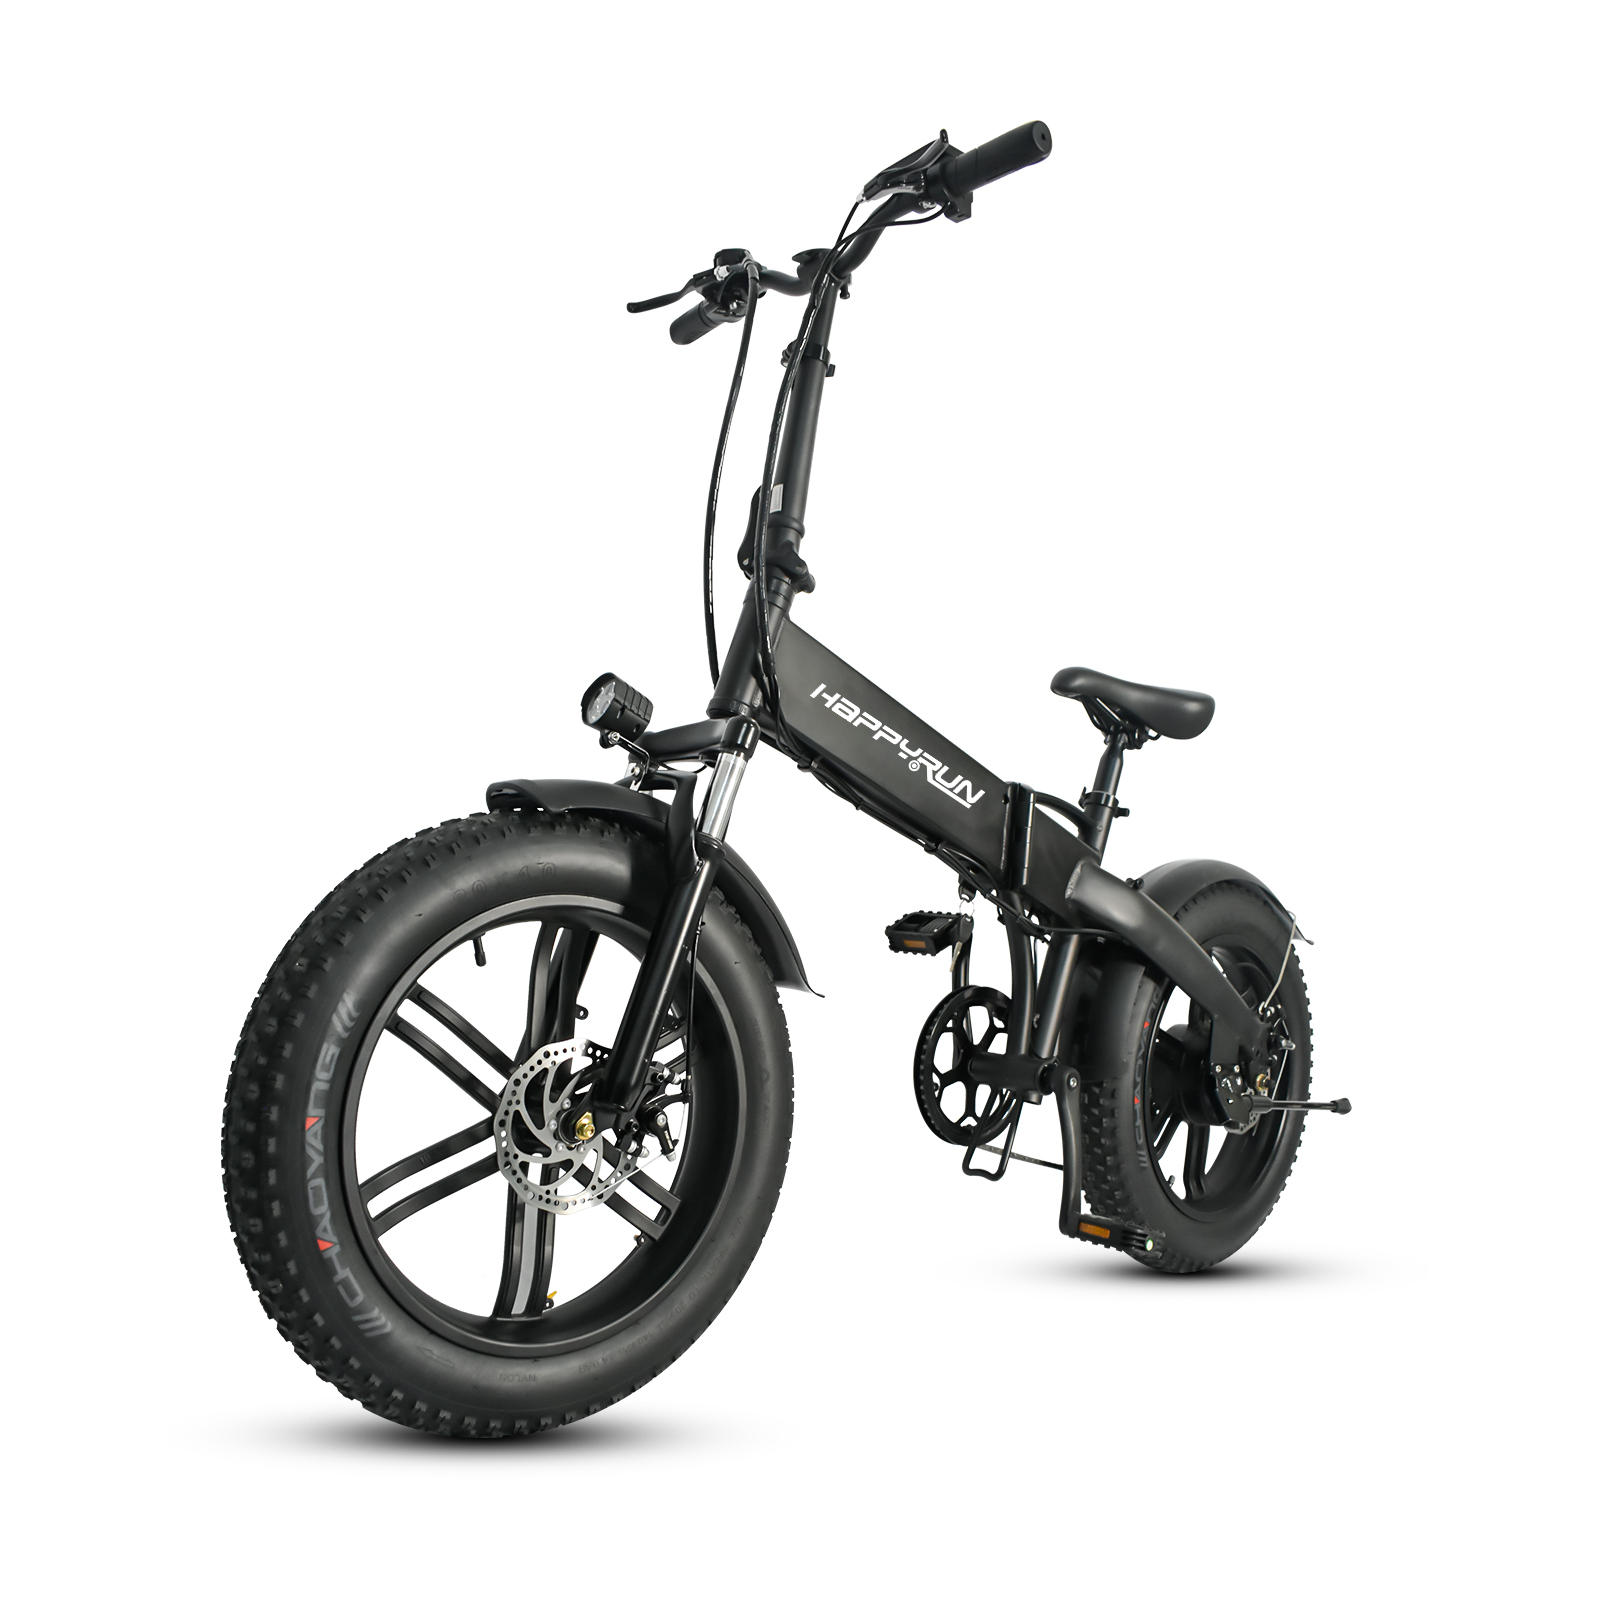 Find EU Direct Happyrun HR2006 350W 36V 10Ah 20x4inch Fat Tire Folding Electric Bicycle 25KM/H Top Speed 50KM Max Mileage Electric Bike for Sale on Gipsybee.com with cryptocurrencies